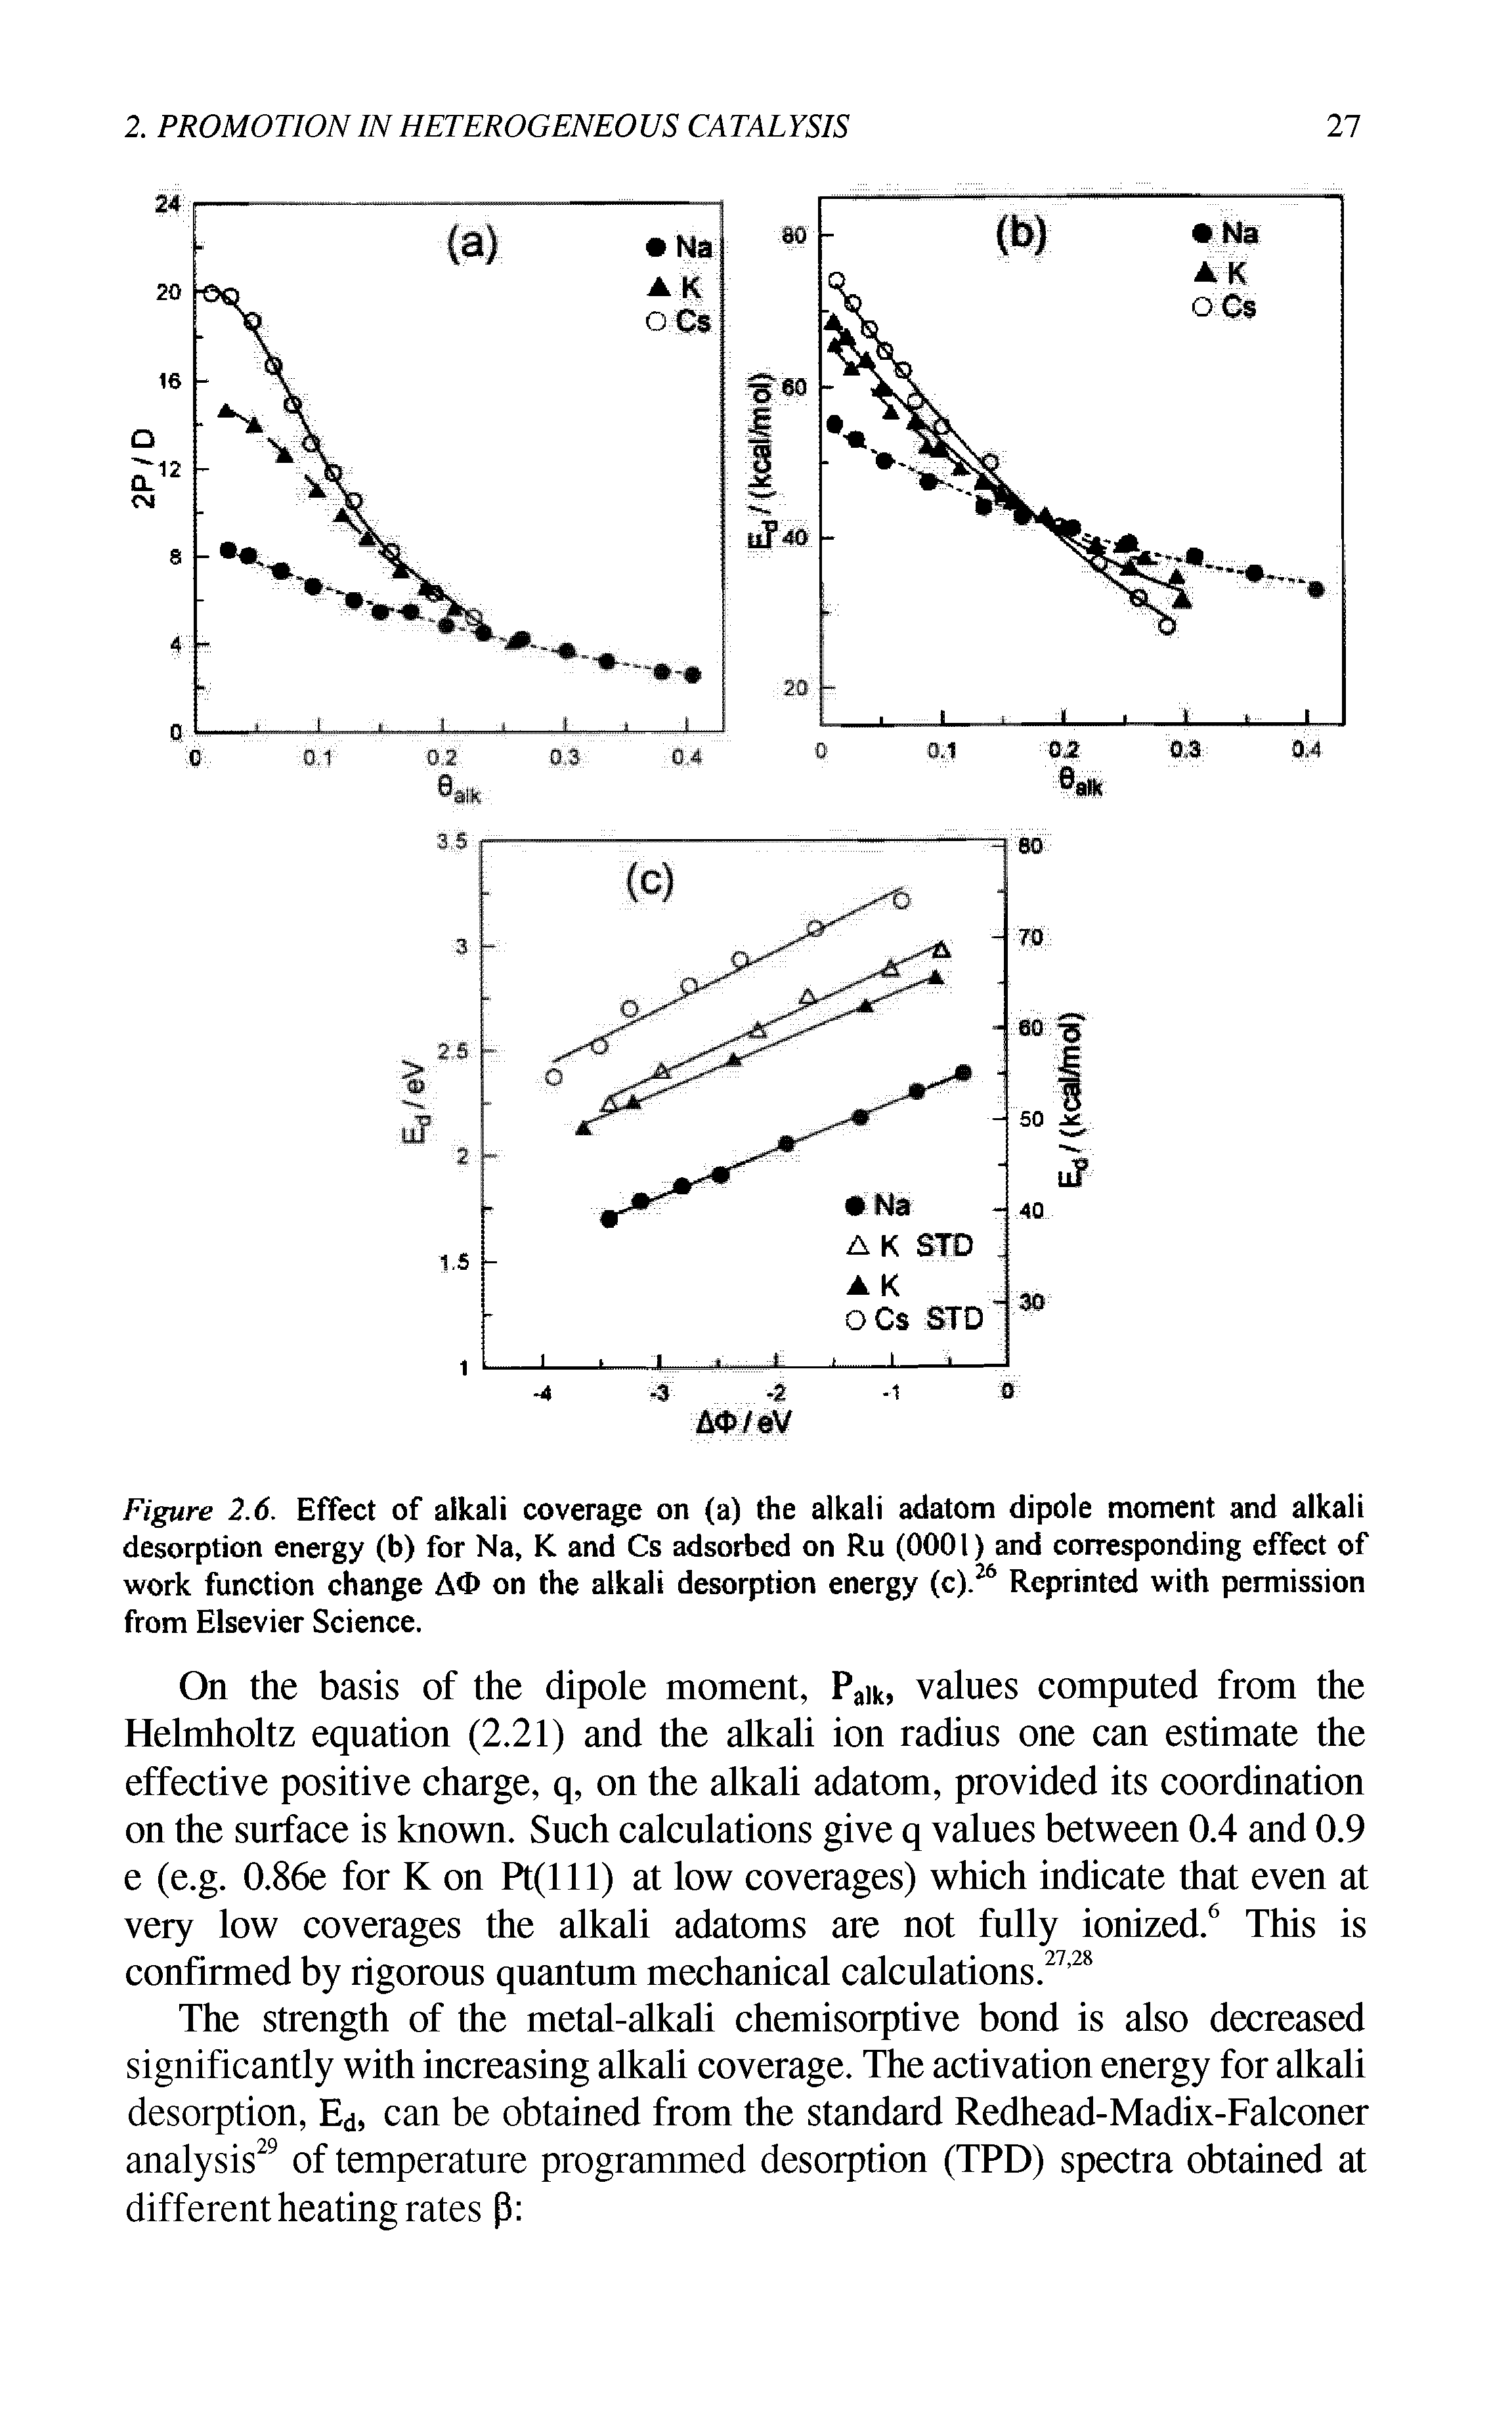 Figure 2.6. Effect of alkali coverage on (a) the alkali adatom dipole moment and alkali desorption energy (b) for Na, K and Cs adsorbed on Ru (0001) and corresponding effect of work function change AO on the alkali desorption energy (c).26 Reprinted with permission from Elsevier Science.